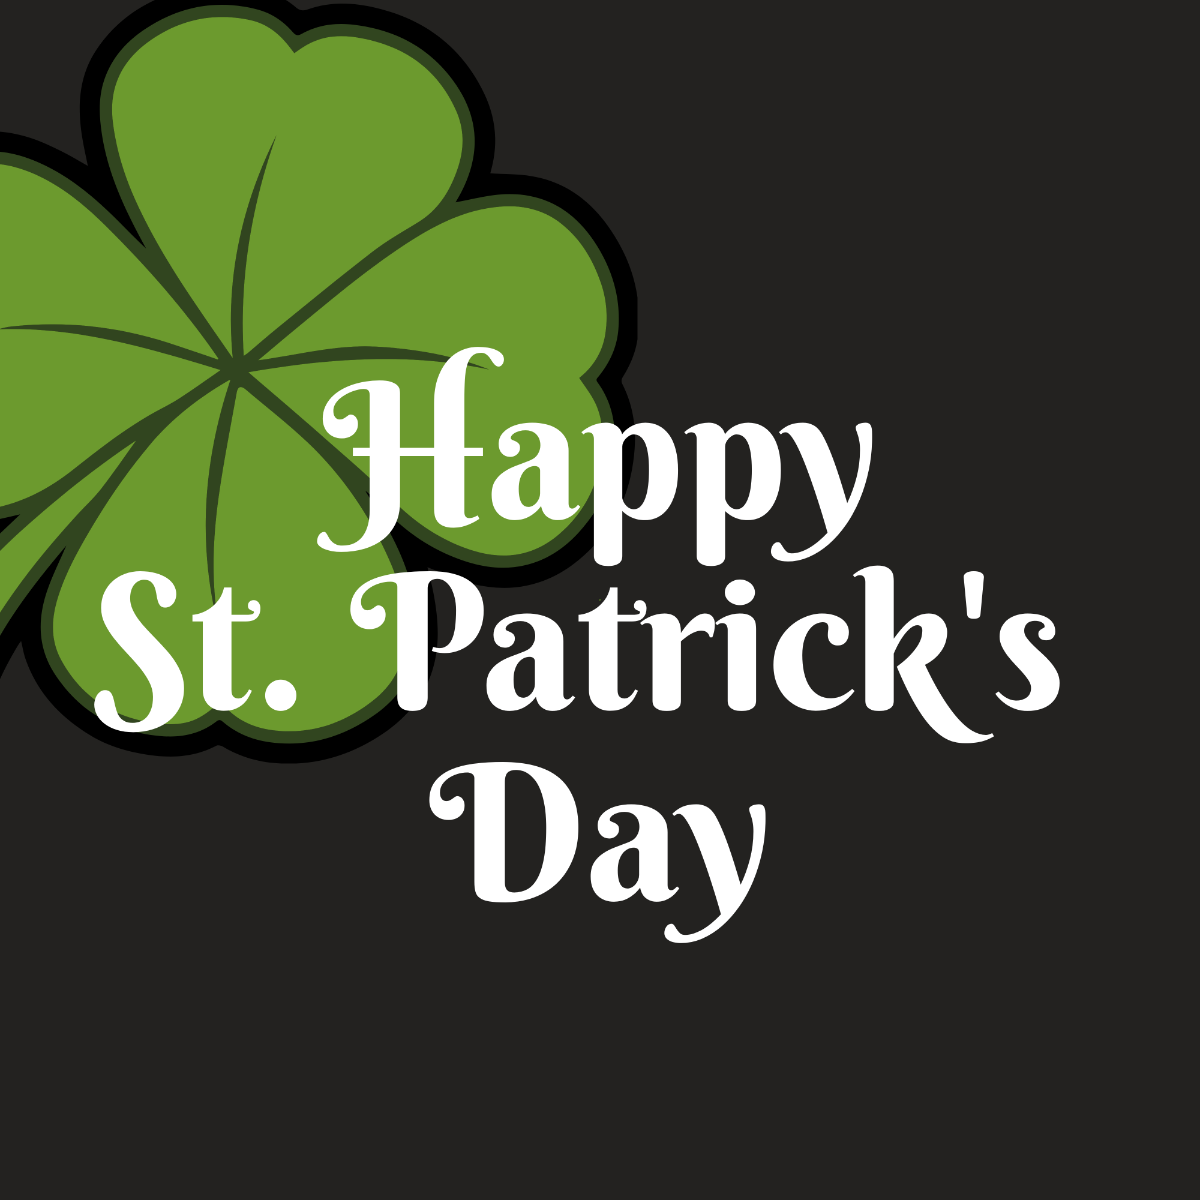 St. Patrick's Day Holiday Vector Template